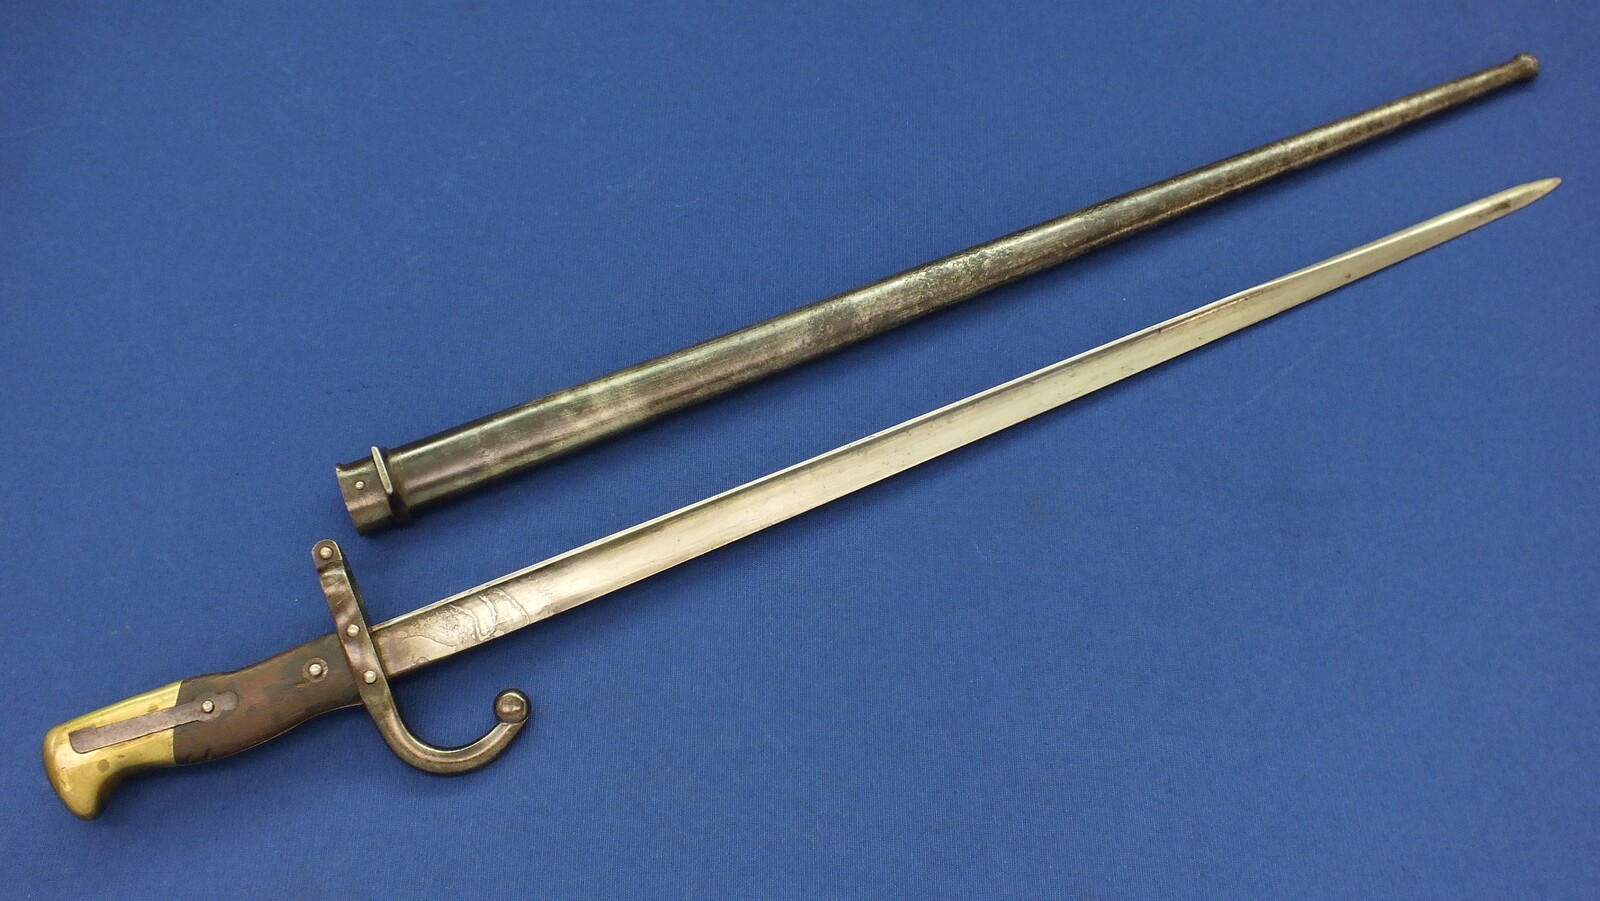 An antique French Model 1874 Gras Bayonet by L. Deny Paris 1881. SN92698, scabbard 40248. Length 66cm. In very good condition. Price 195 euro